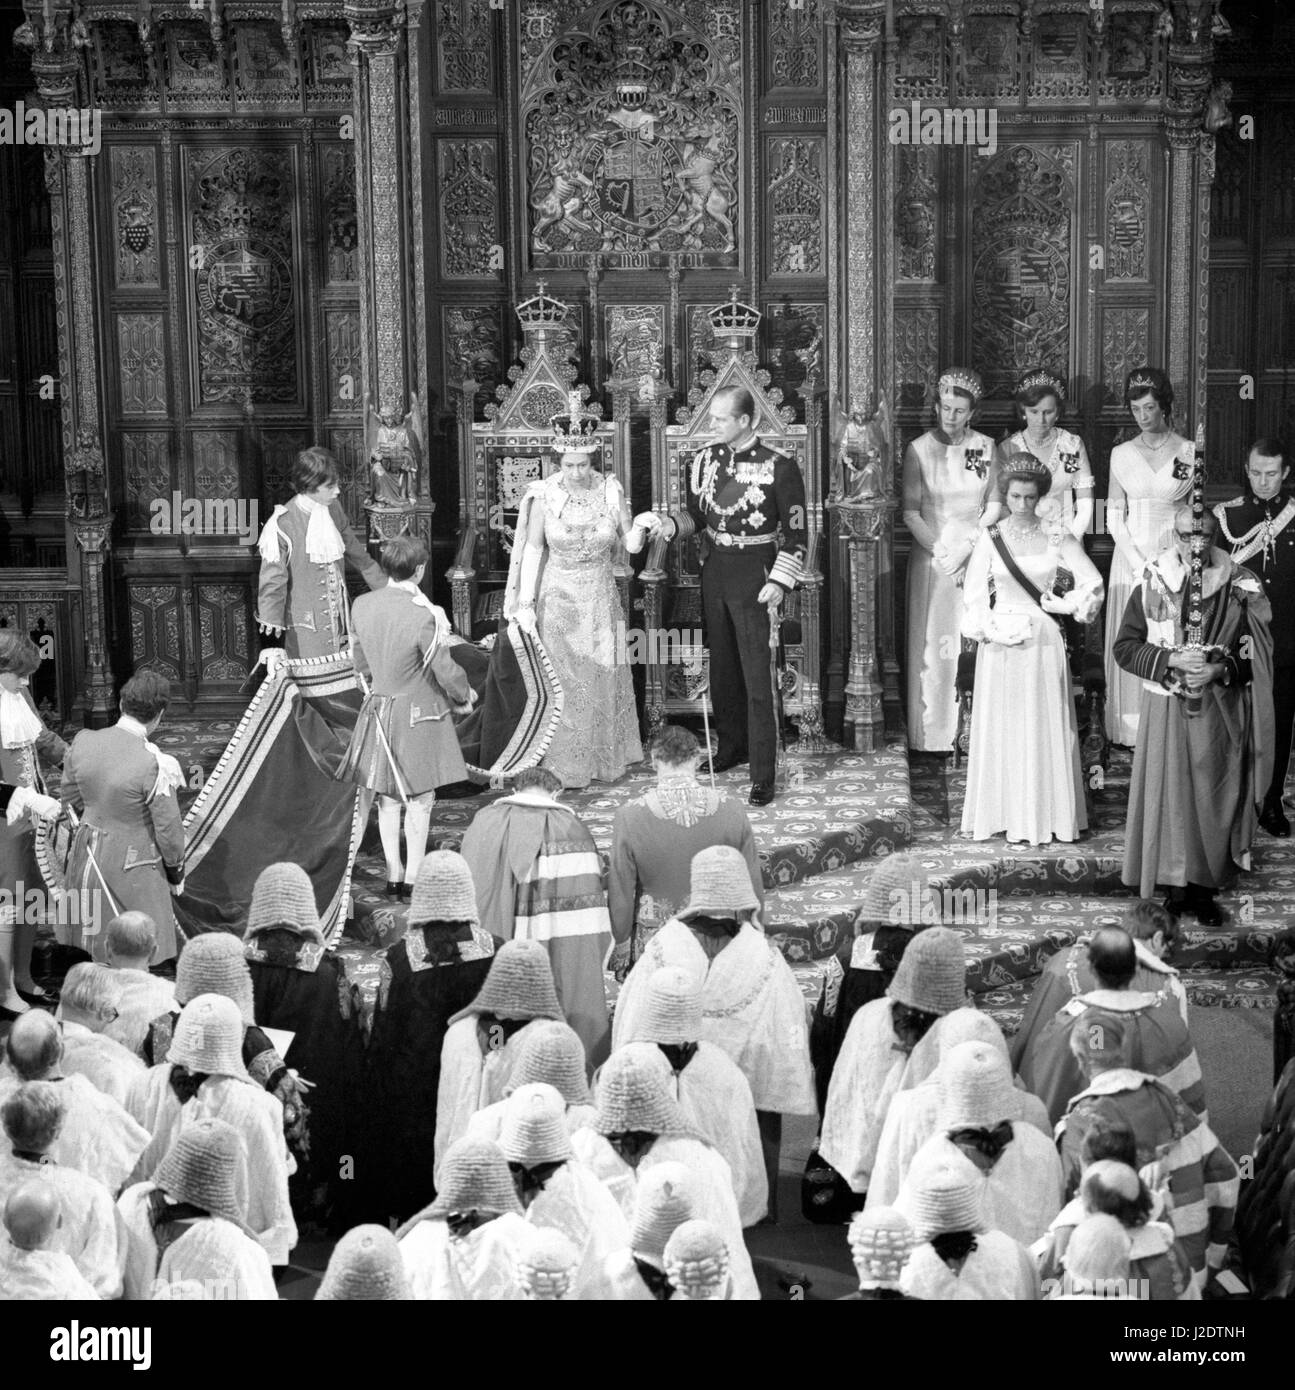 The pages of honour lift the train of Queen Elizabeth II's robes as she and Prince Philip, Duke of Edinburgh, takes her hand to raise her from her throne after her speech at the State Opening of Parliament in the chamber of the House of Lords. Also in the image are Princess Anne (foreground right), her husband Captain Mark Phillips (extreme right), and The Sword of State, Marshal of the Royal Air Force the Lord Elworthy. Stock Photo